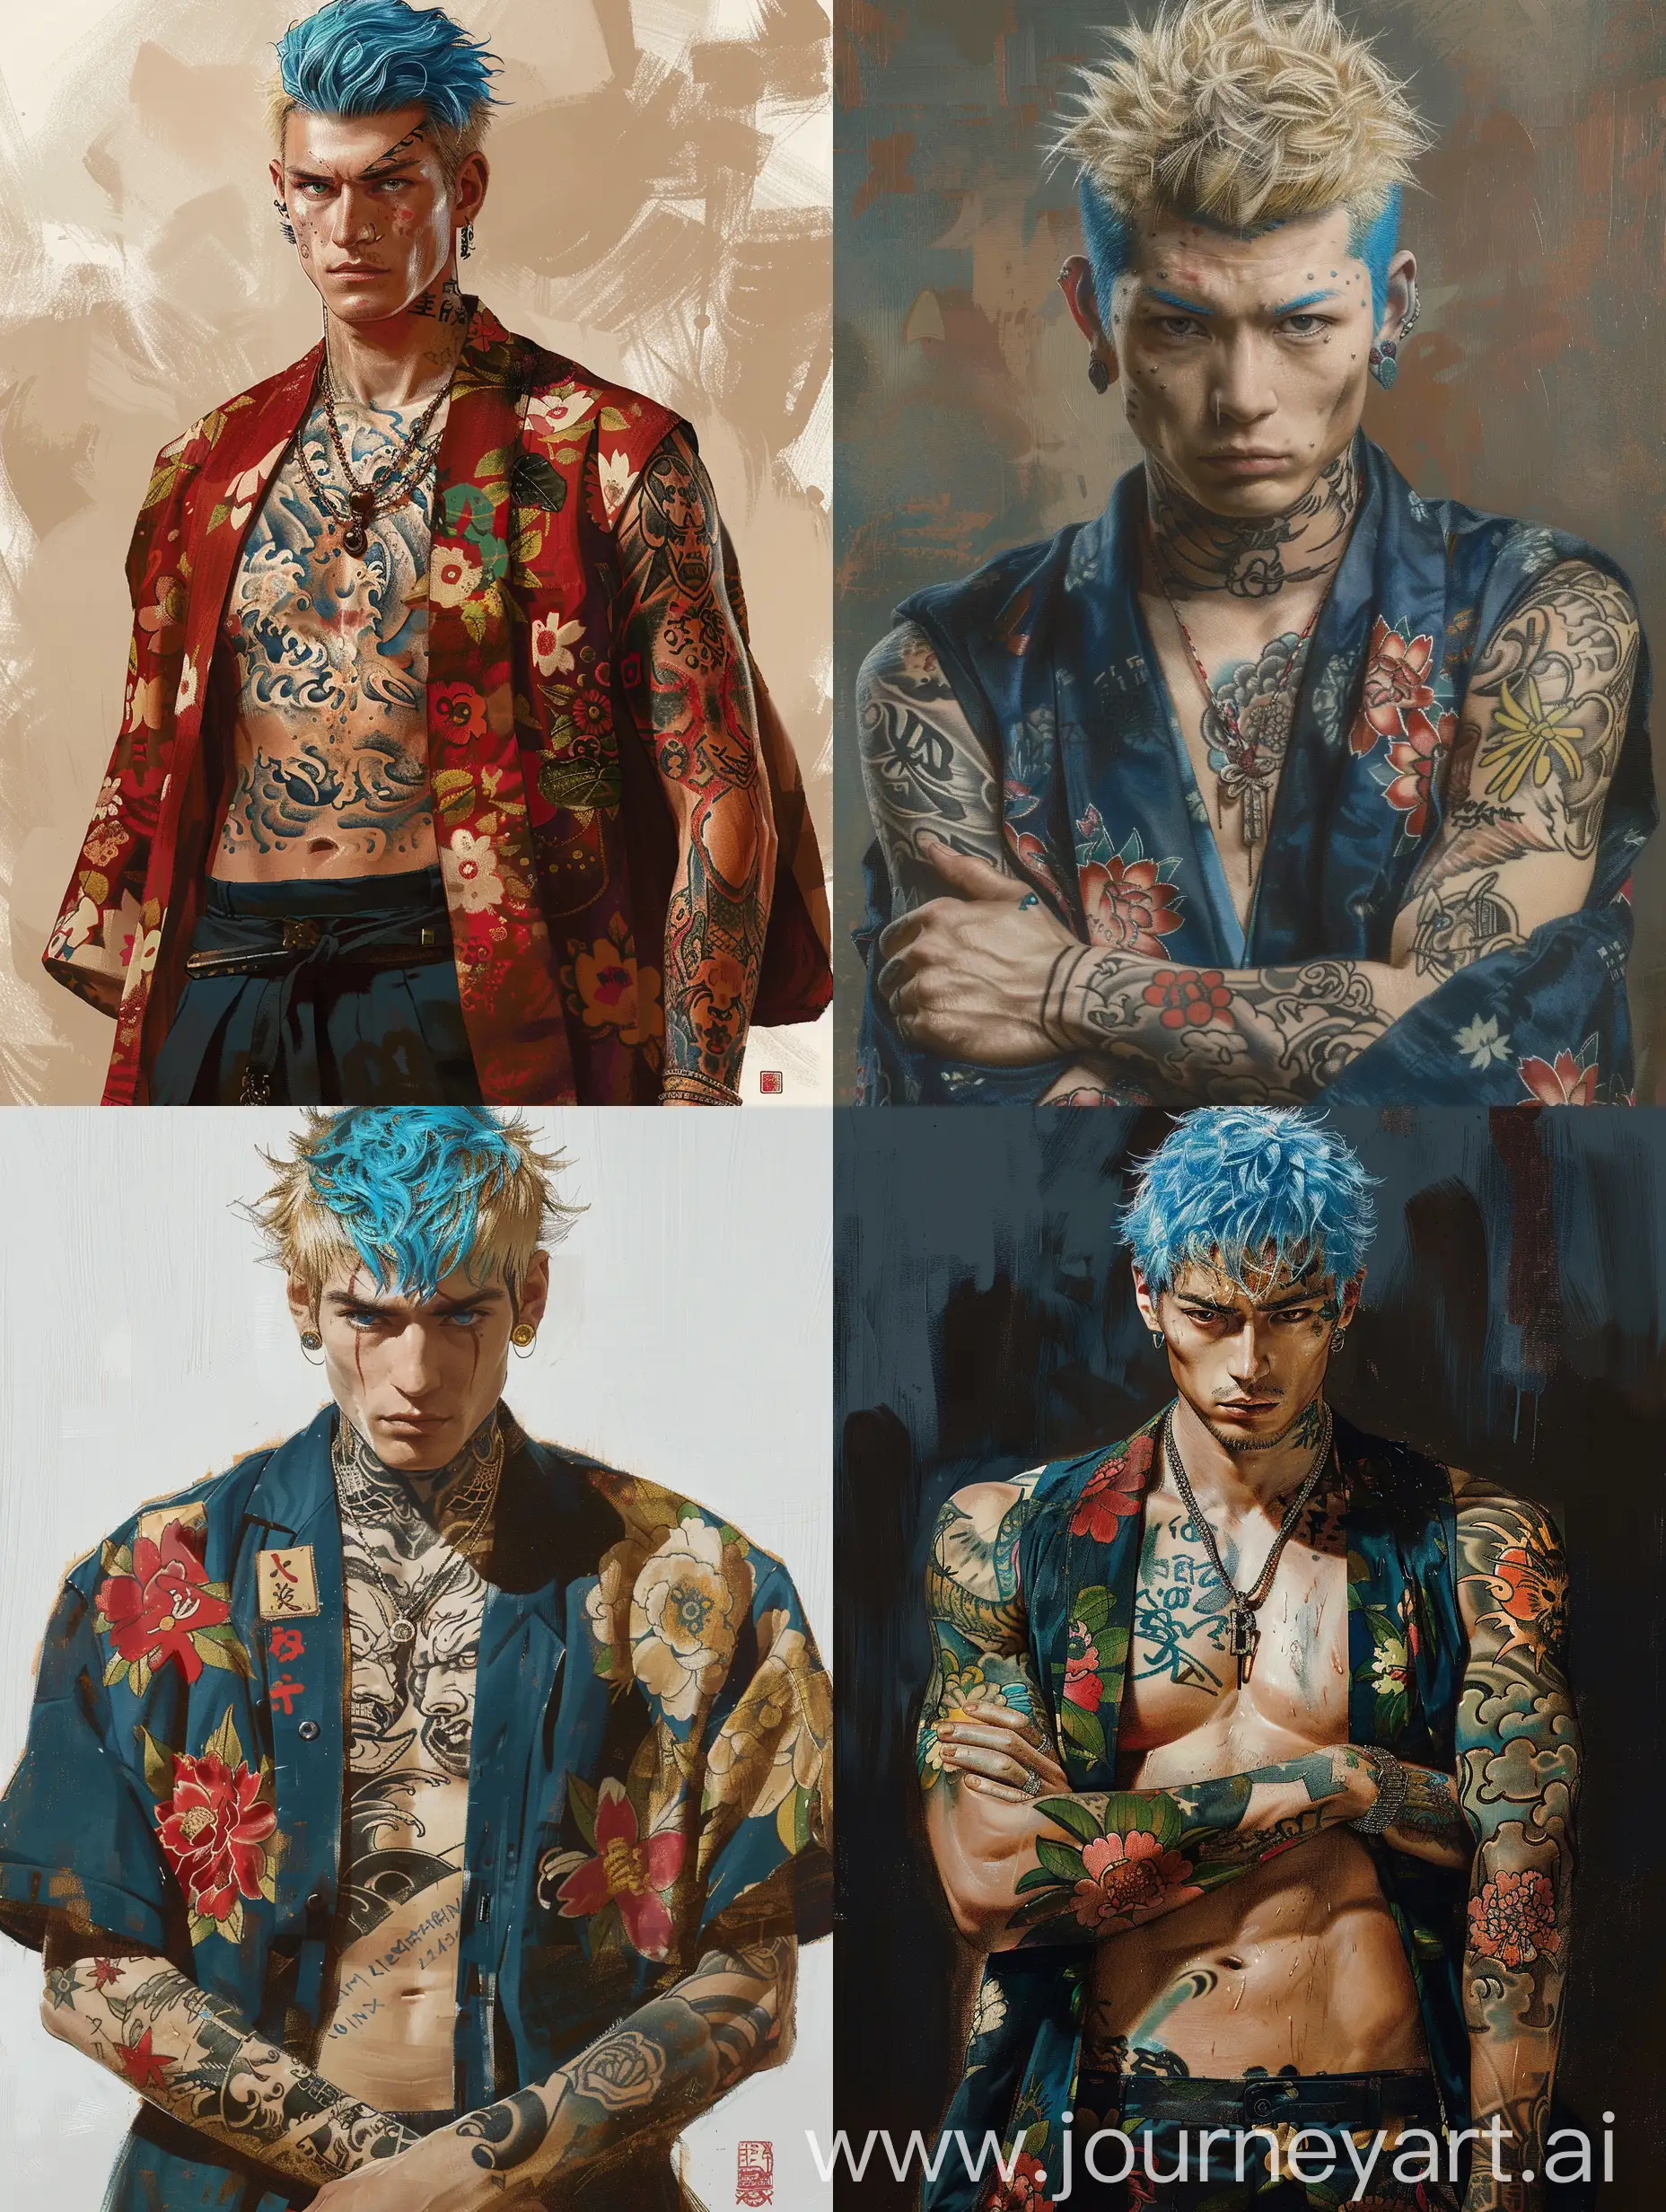 A 20 years old half German half Japanese man, with blue yes and bleached blonde hair, he is in the yakuza and has both arms tattooed